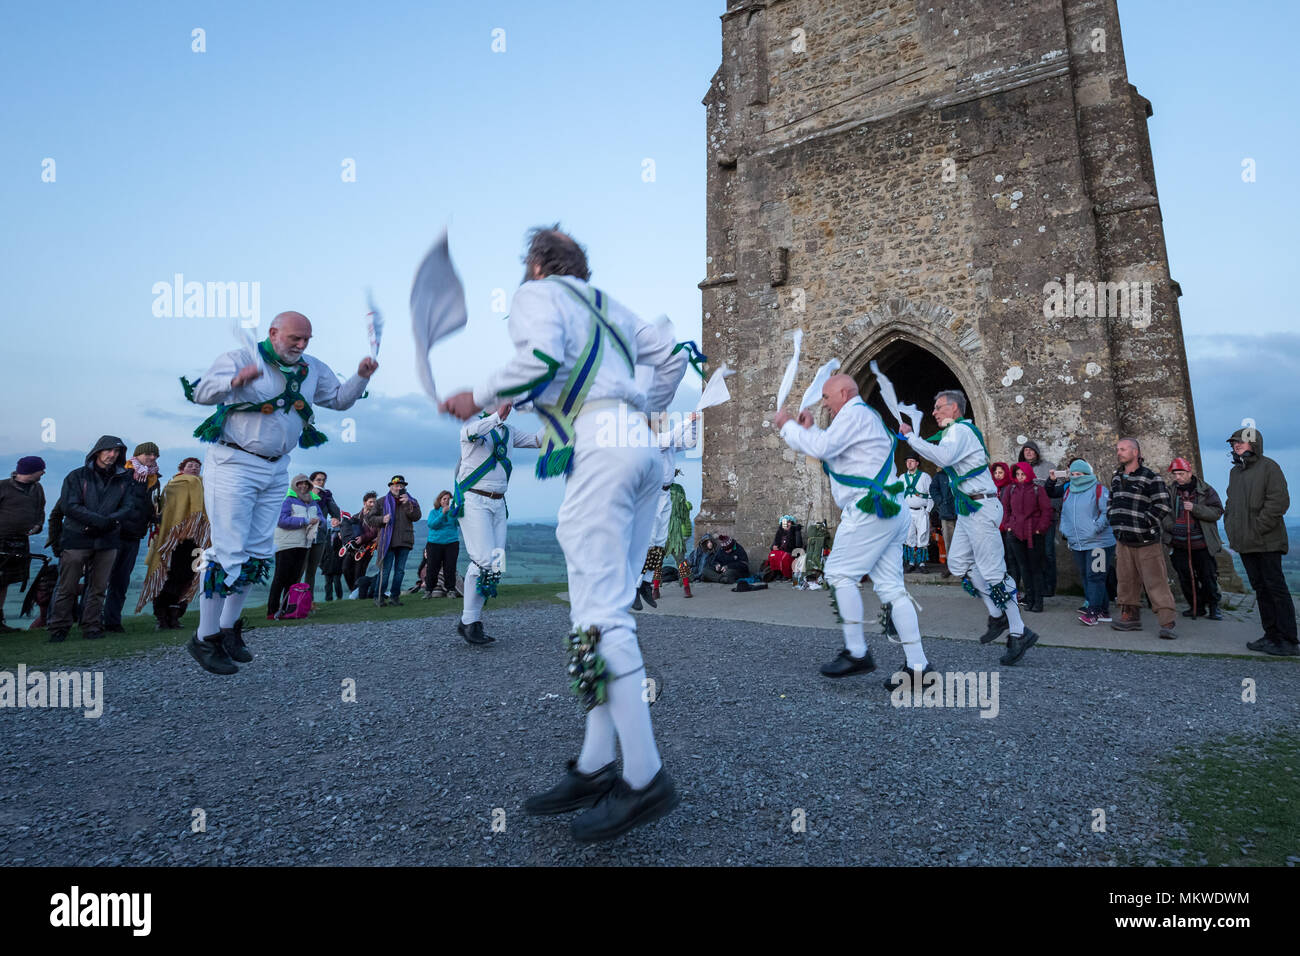 Beltane celebrations on May Day in Glastonbury to celebrate the coming of summer. Stock Photo